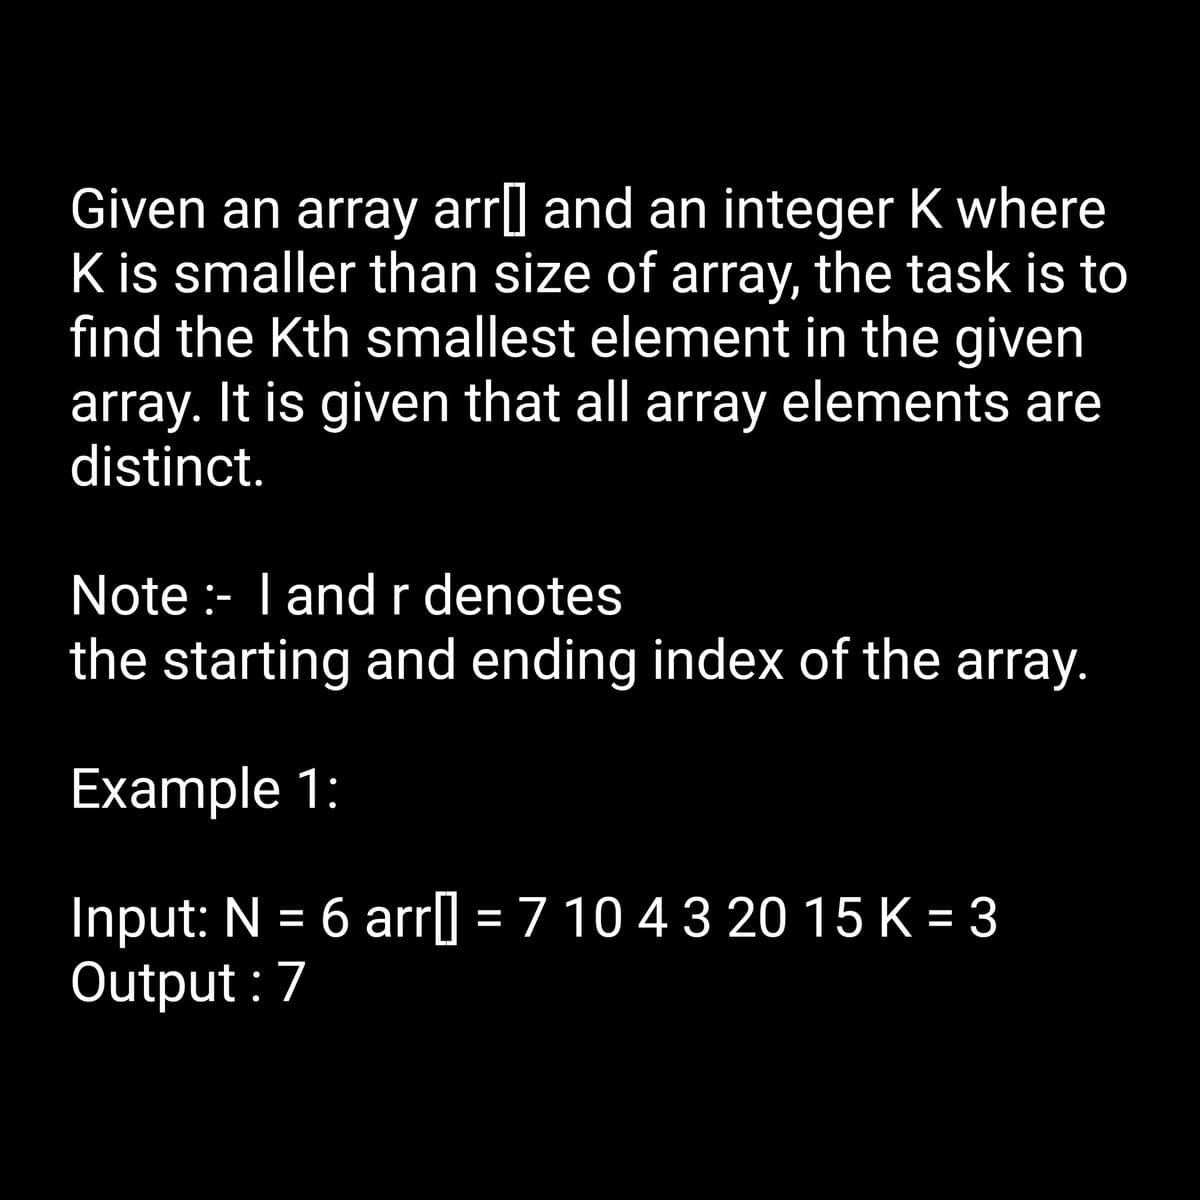 Given an array arr] and an integer K where
K is smaller than size of array, the task is to
find the Kth smallest element in the given
array. It is given that all array elements are
distinct.
Note :- I and r denotes
the starting and ending index of the array.
Example 1:
Input: N = 6 arr[] = 7 10 4 3 20 15 K = 3
Output: 7